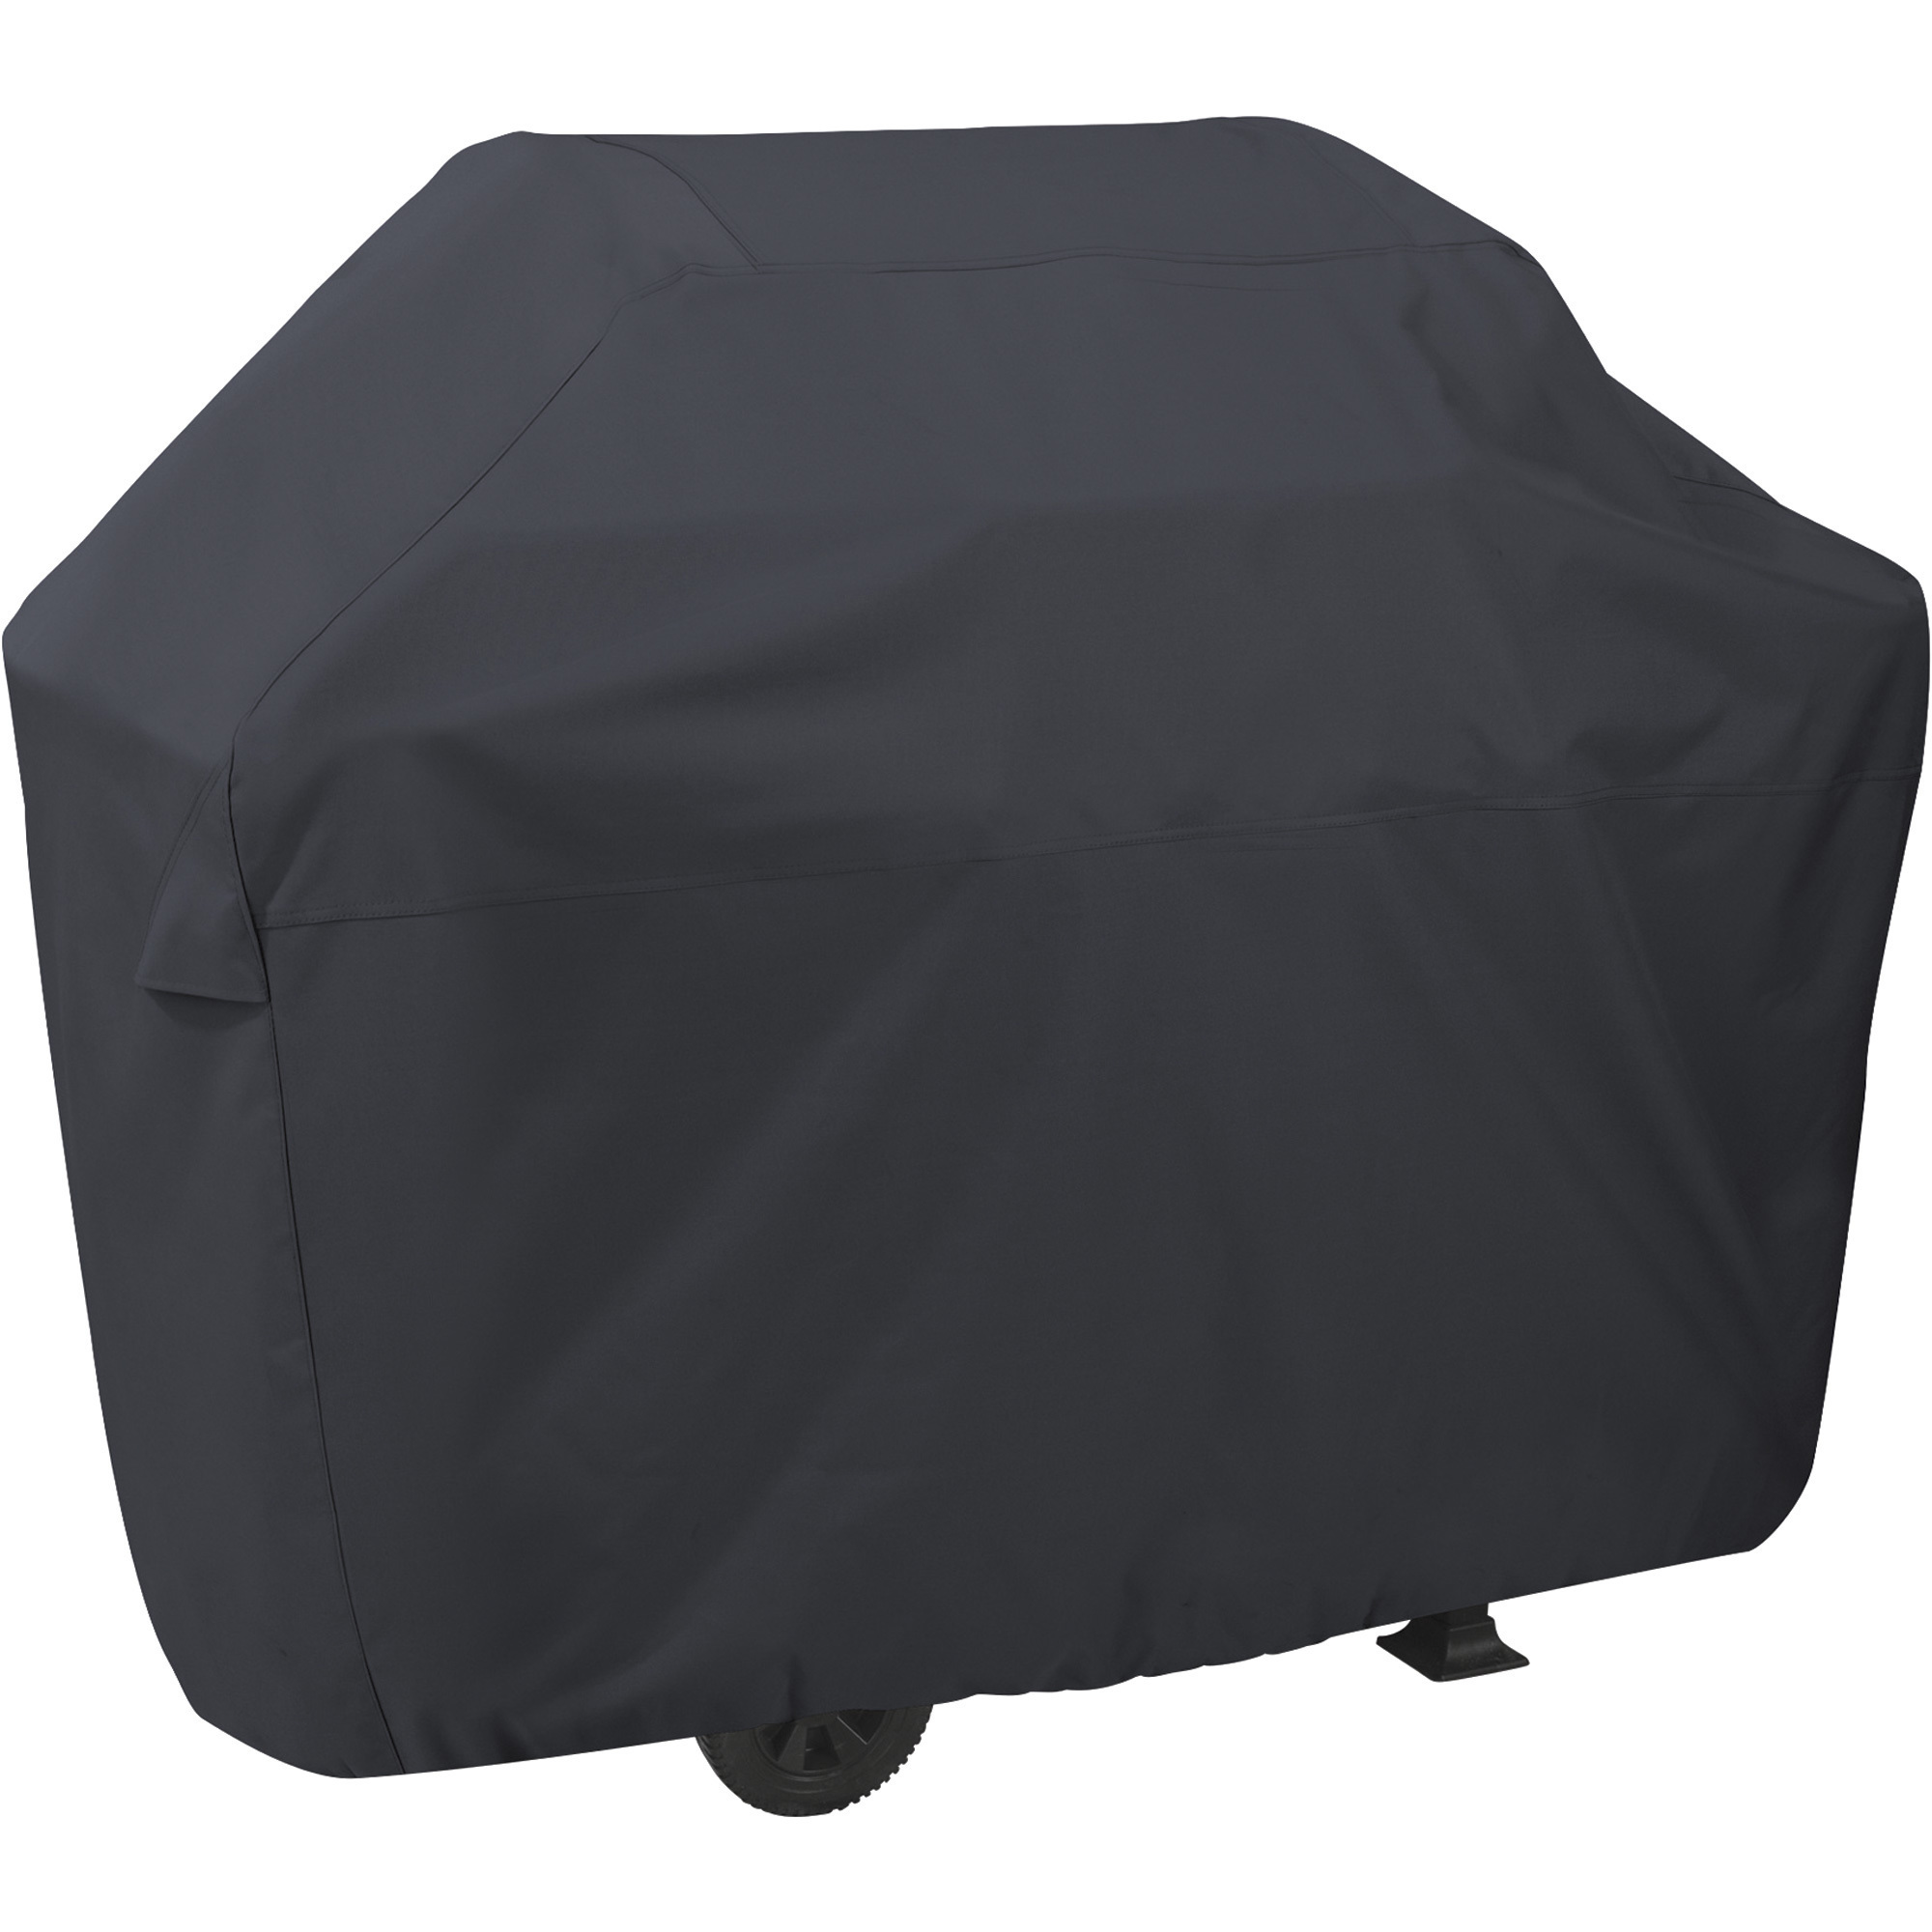 Classic Accessories BBQ Grill Cover, Medium, Black Fits Grills up to 58Inch L x 26Inch D x 48Inch H, Model 55-306-030401-00